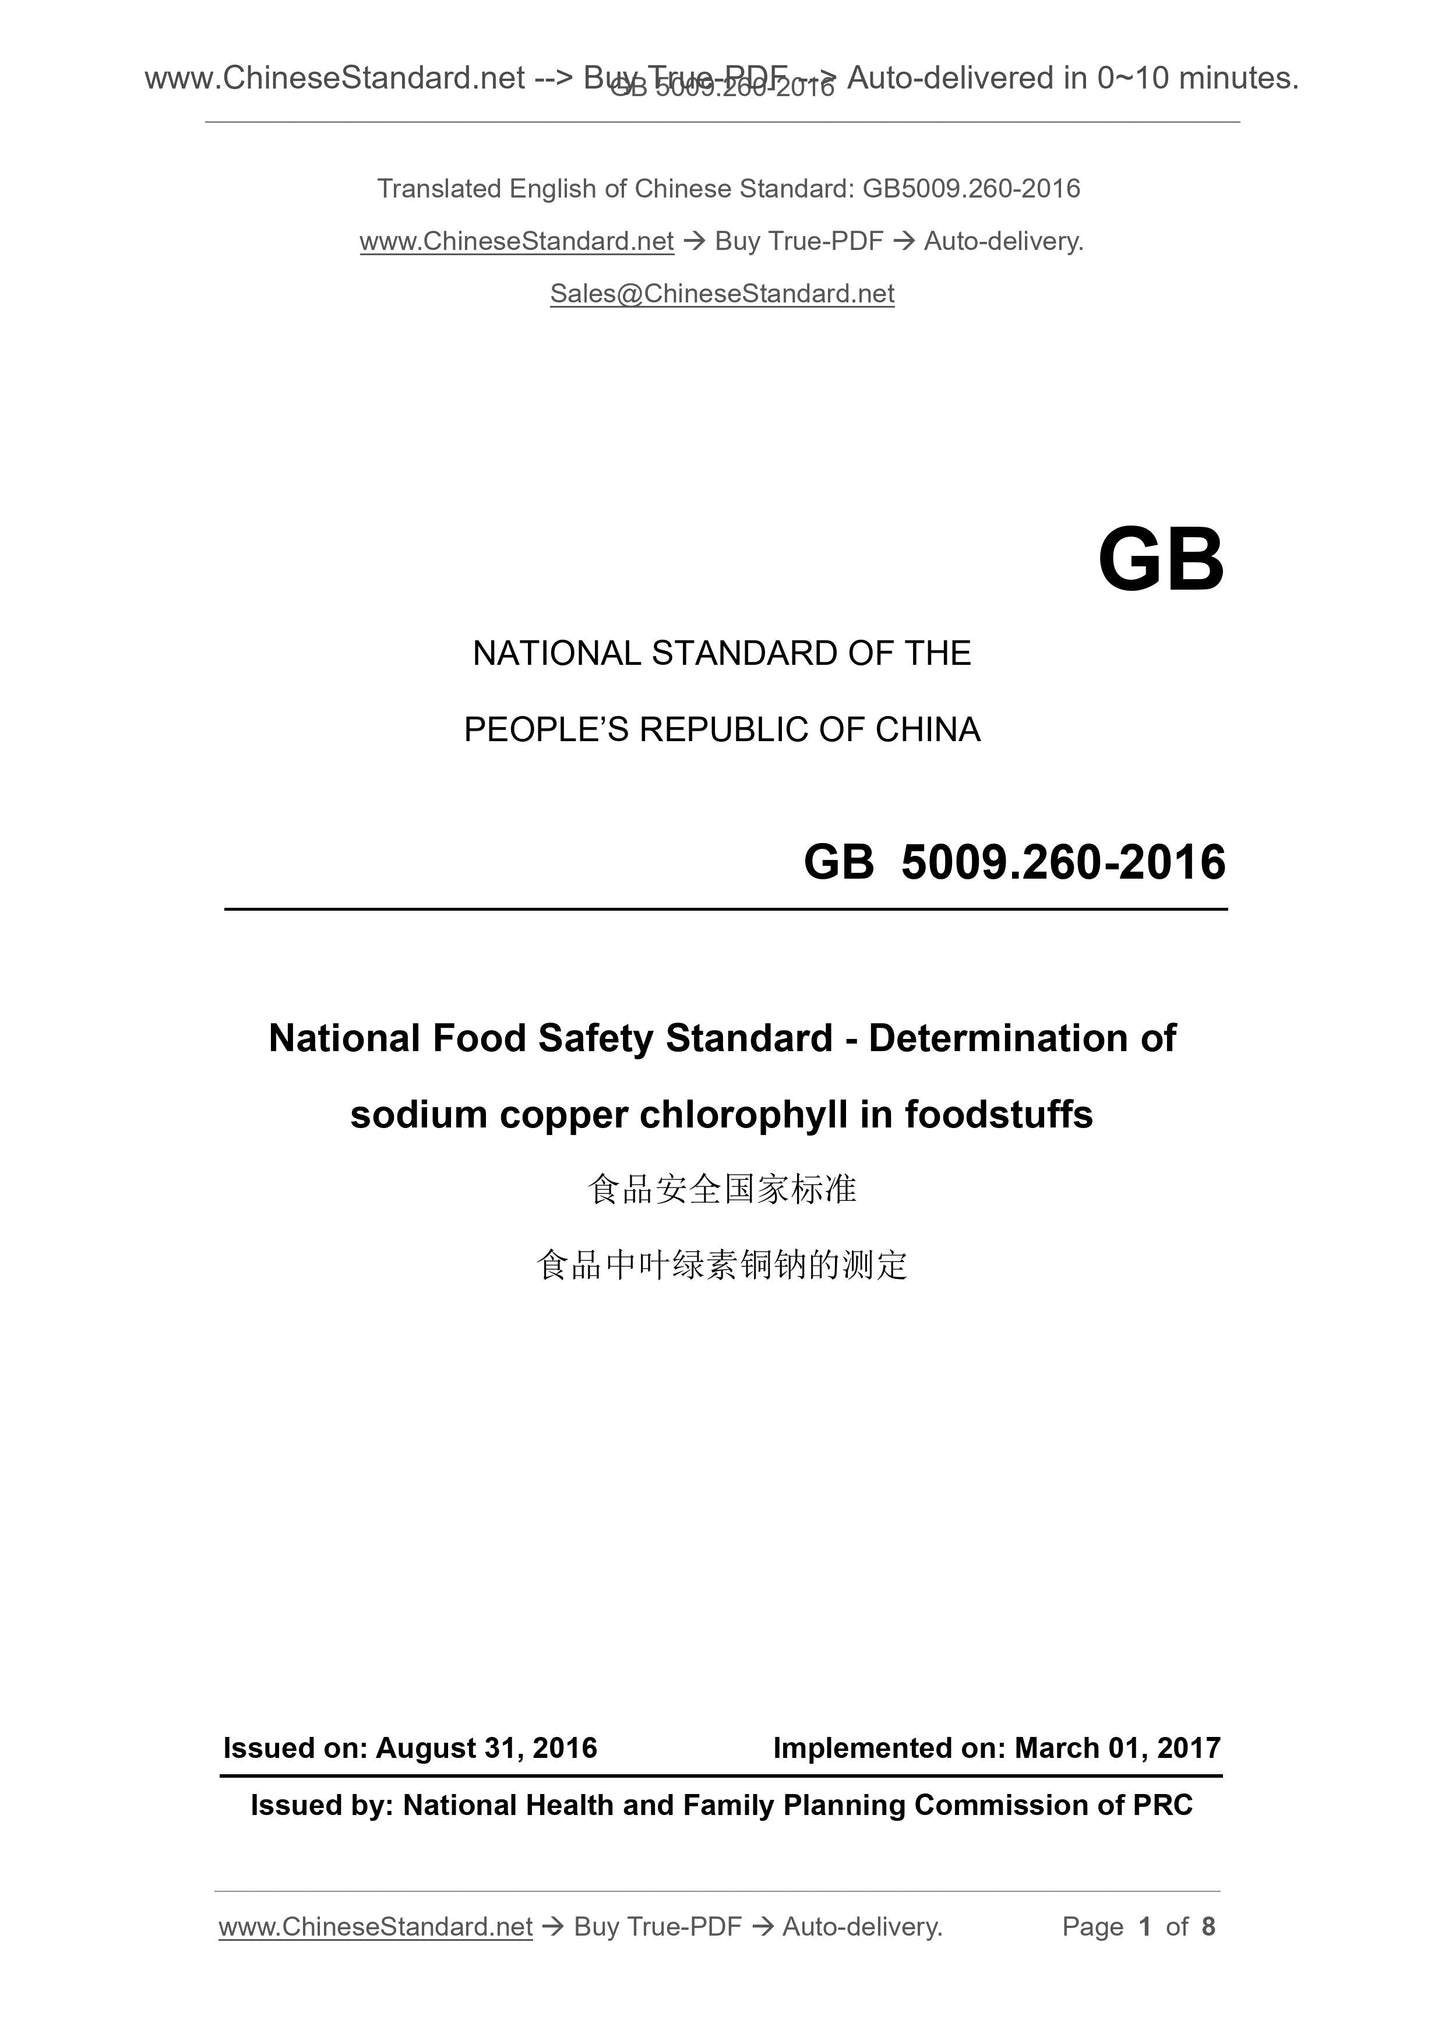 GB 5009.260-2016 Page 1